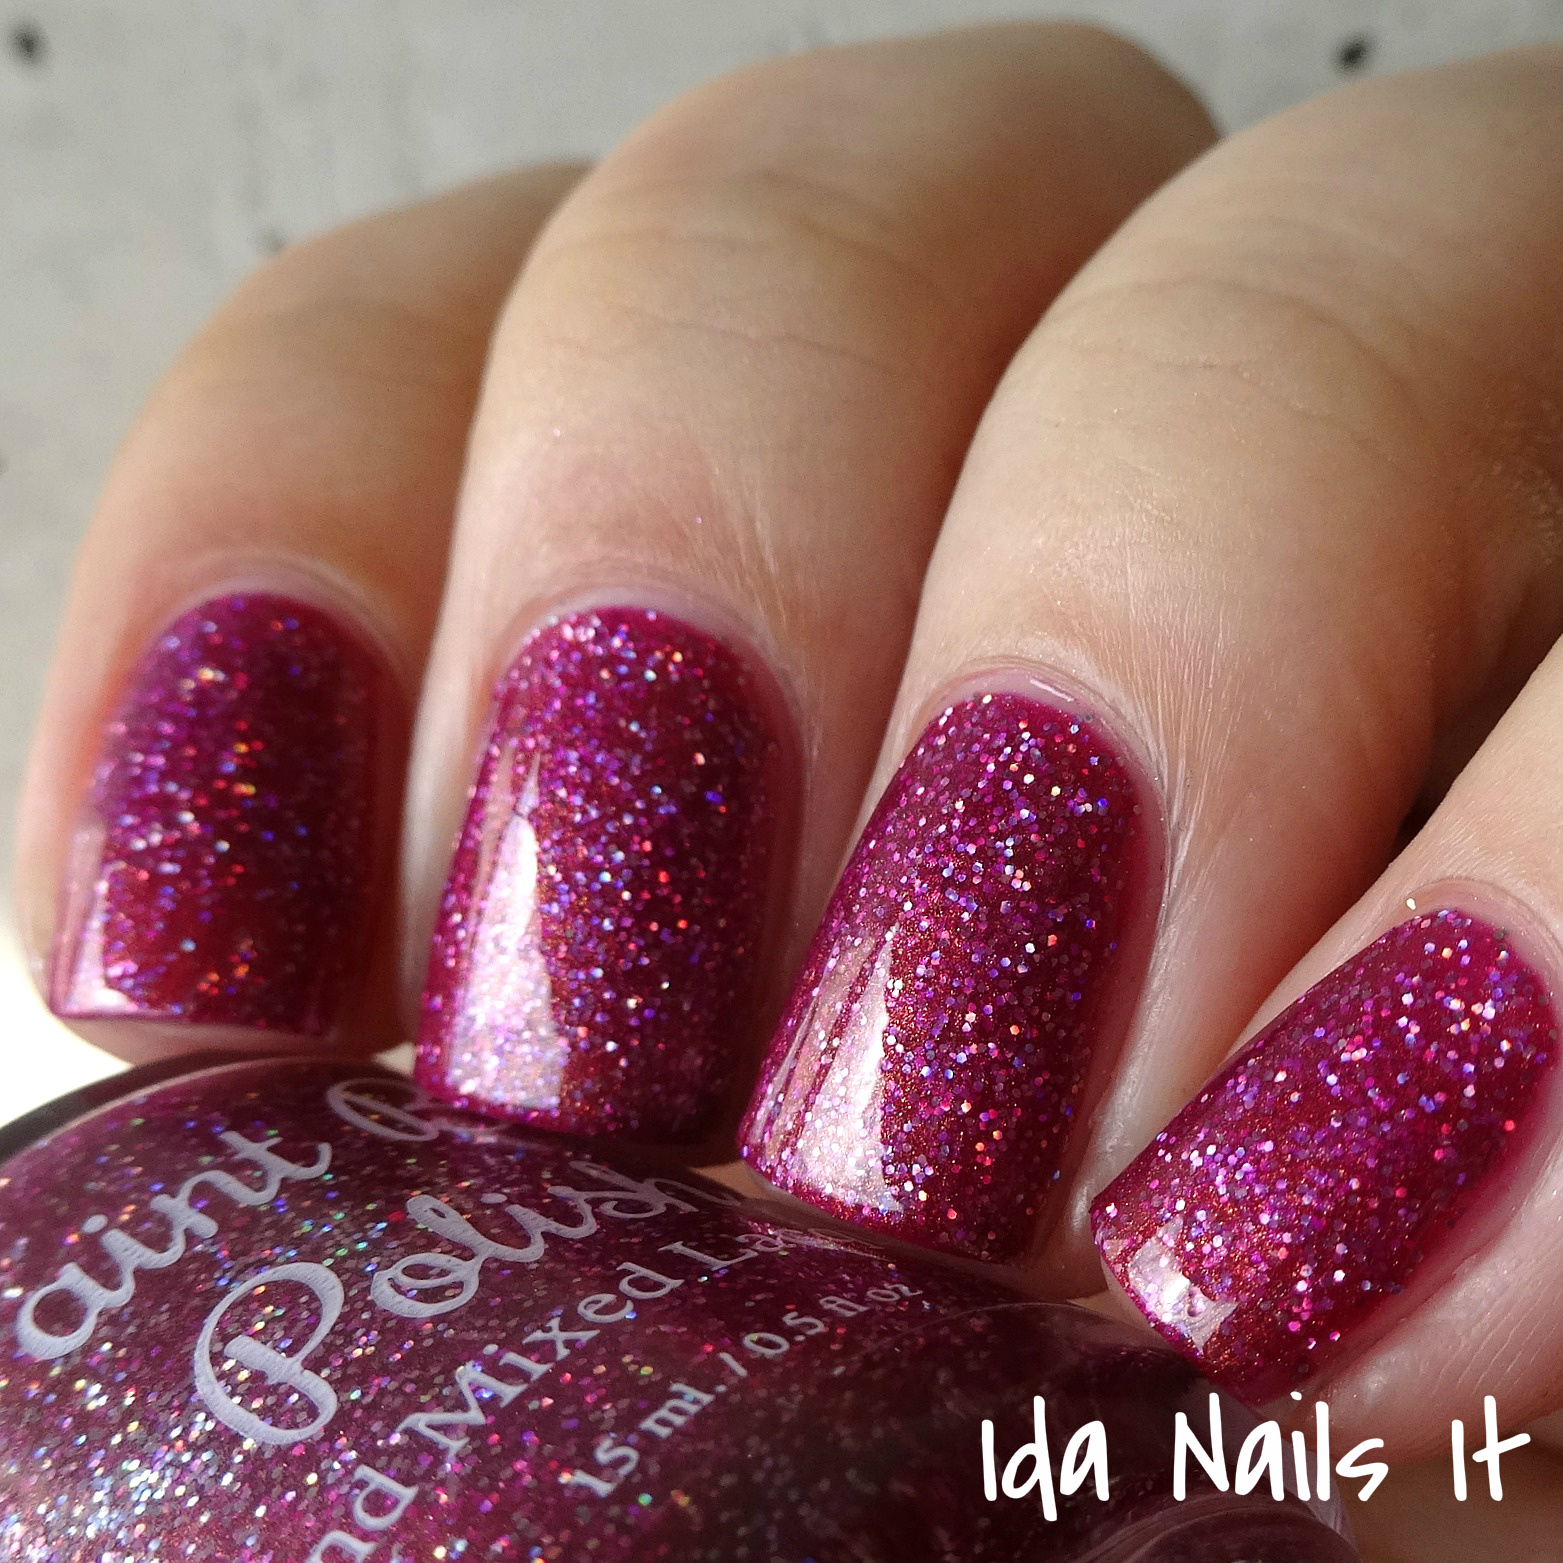 Ida Nails It: Paint Box Polish LE Valentine's Day Set with Love's Keen  Sting: Swatches and Review